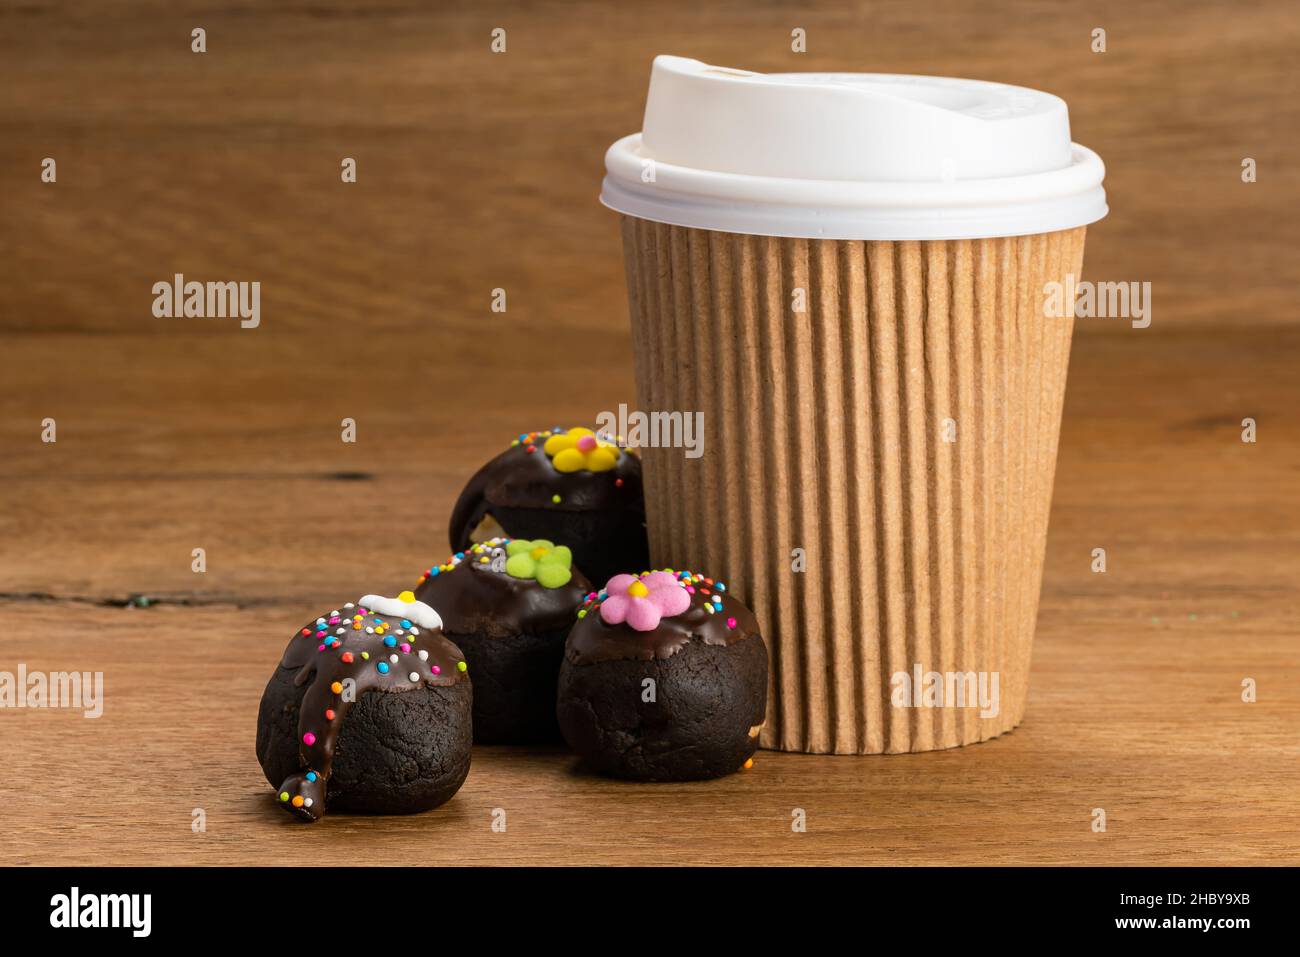 Chocolate balls or choc balls topping with multicolored rainbow sprinkles and colored sugar flower with paper cup of coffee on wooden table. Stock Photo